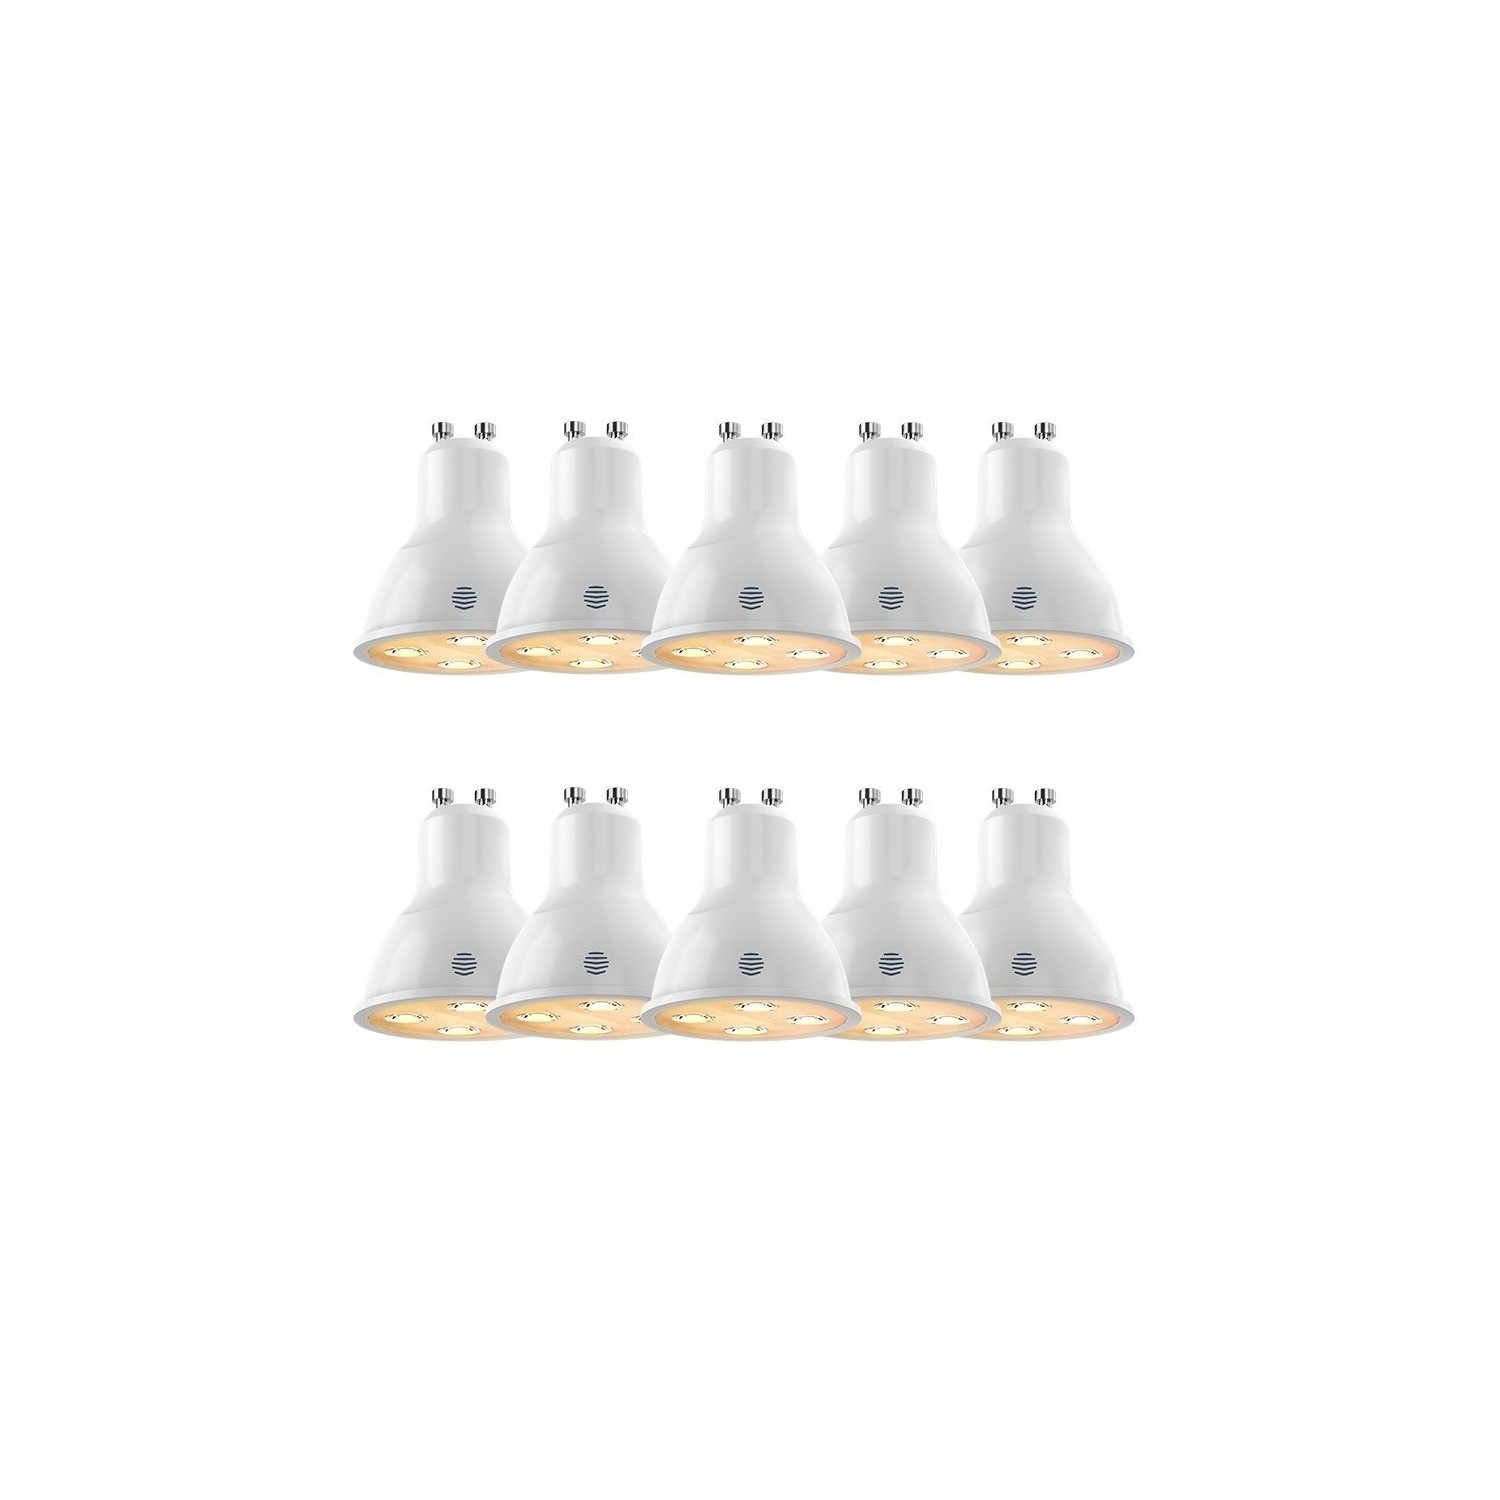 Hive Active Light Dimmable Bulb with GU10 Spotlight Ending - 10 Pack